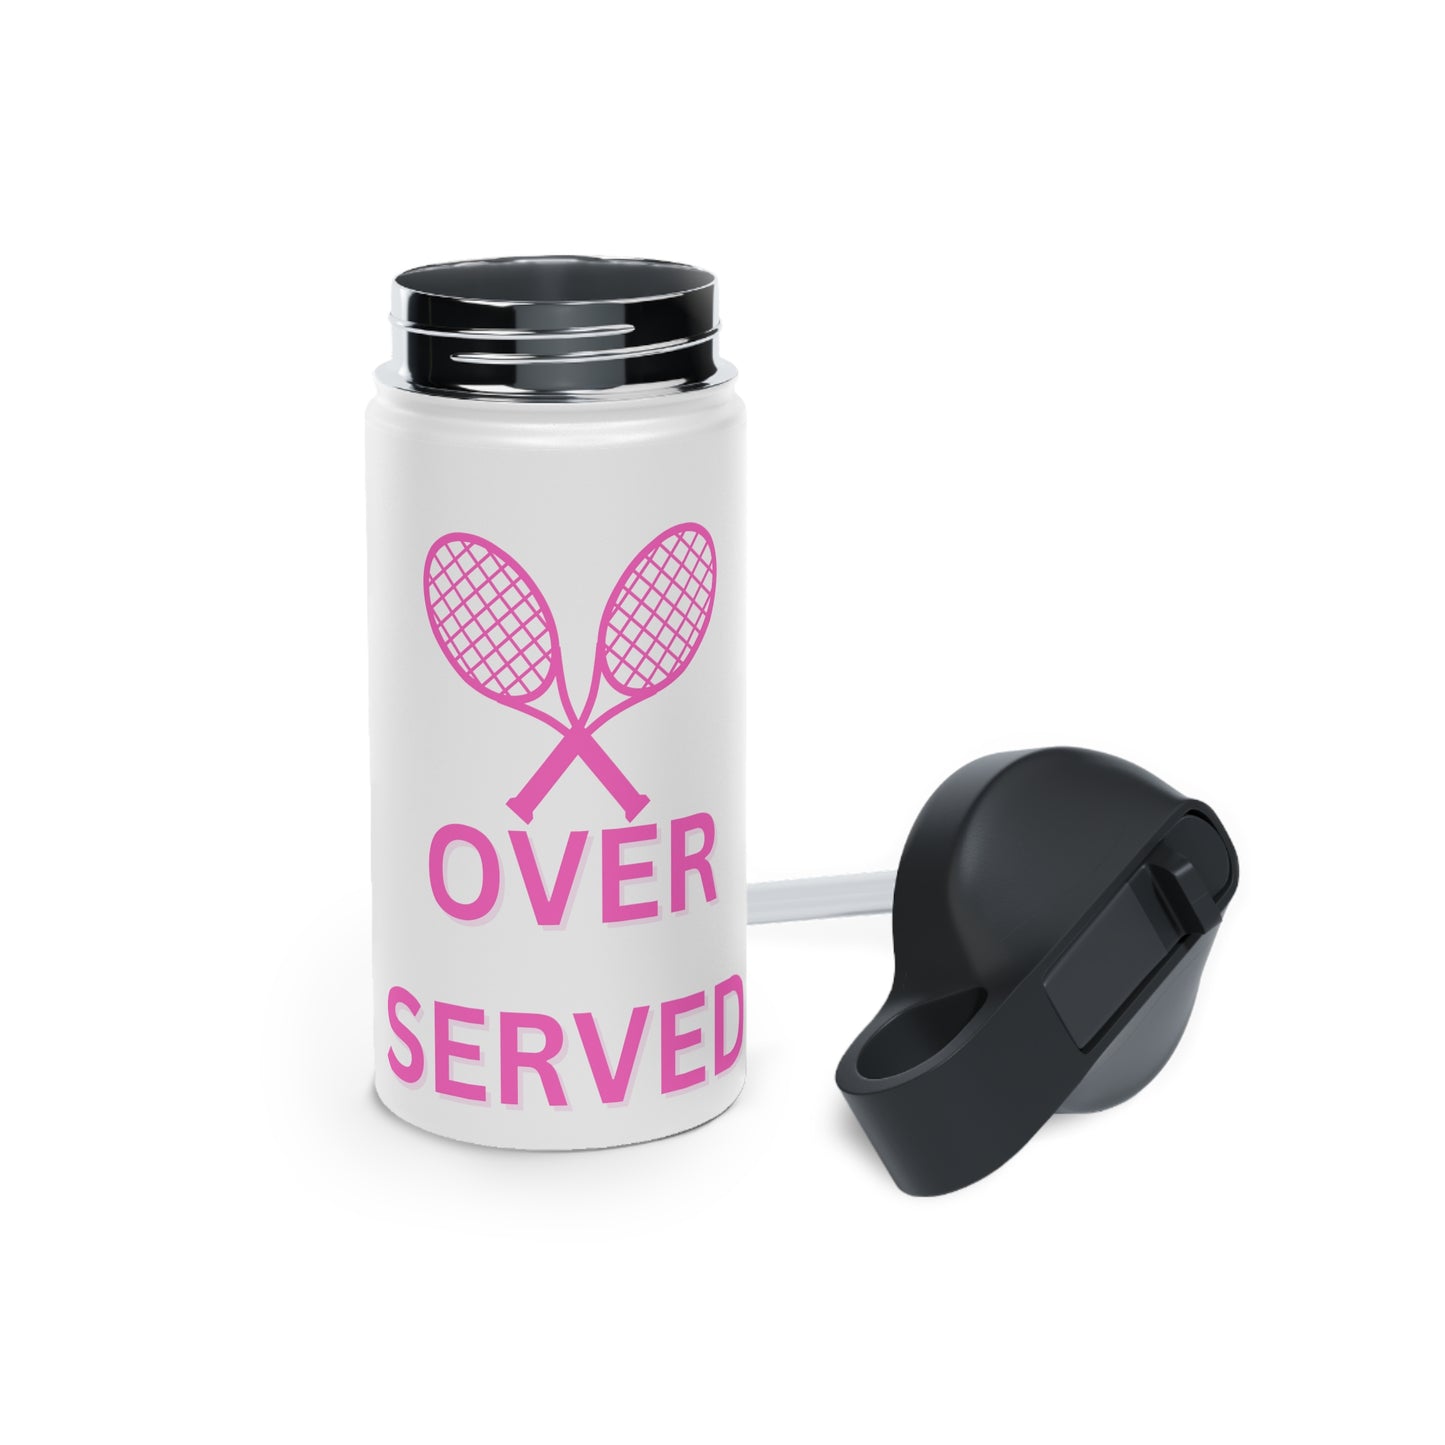 Over Served tennis water bottle